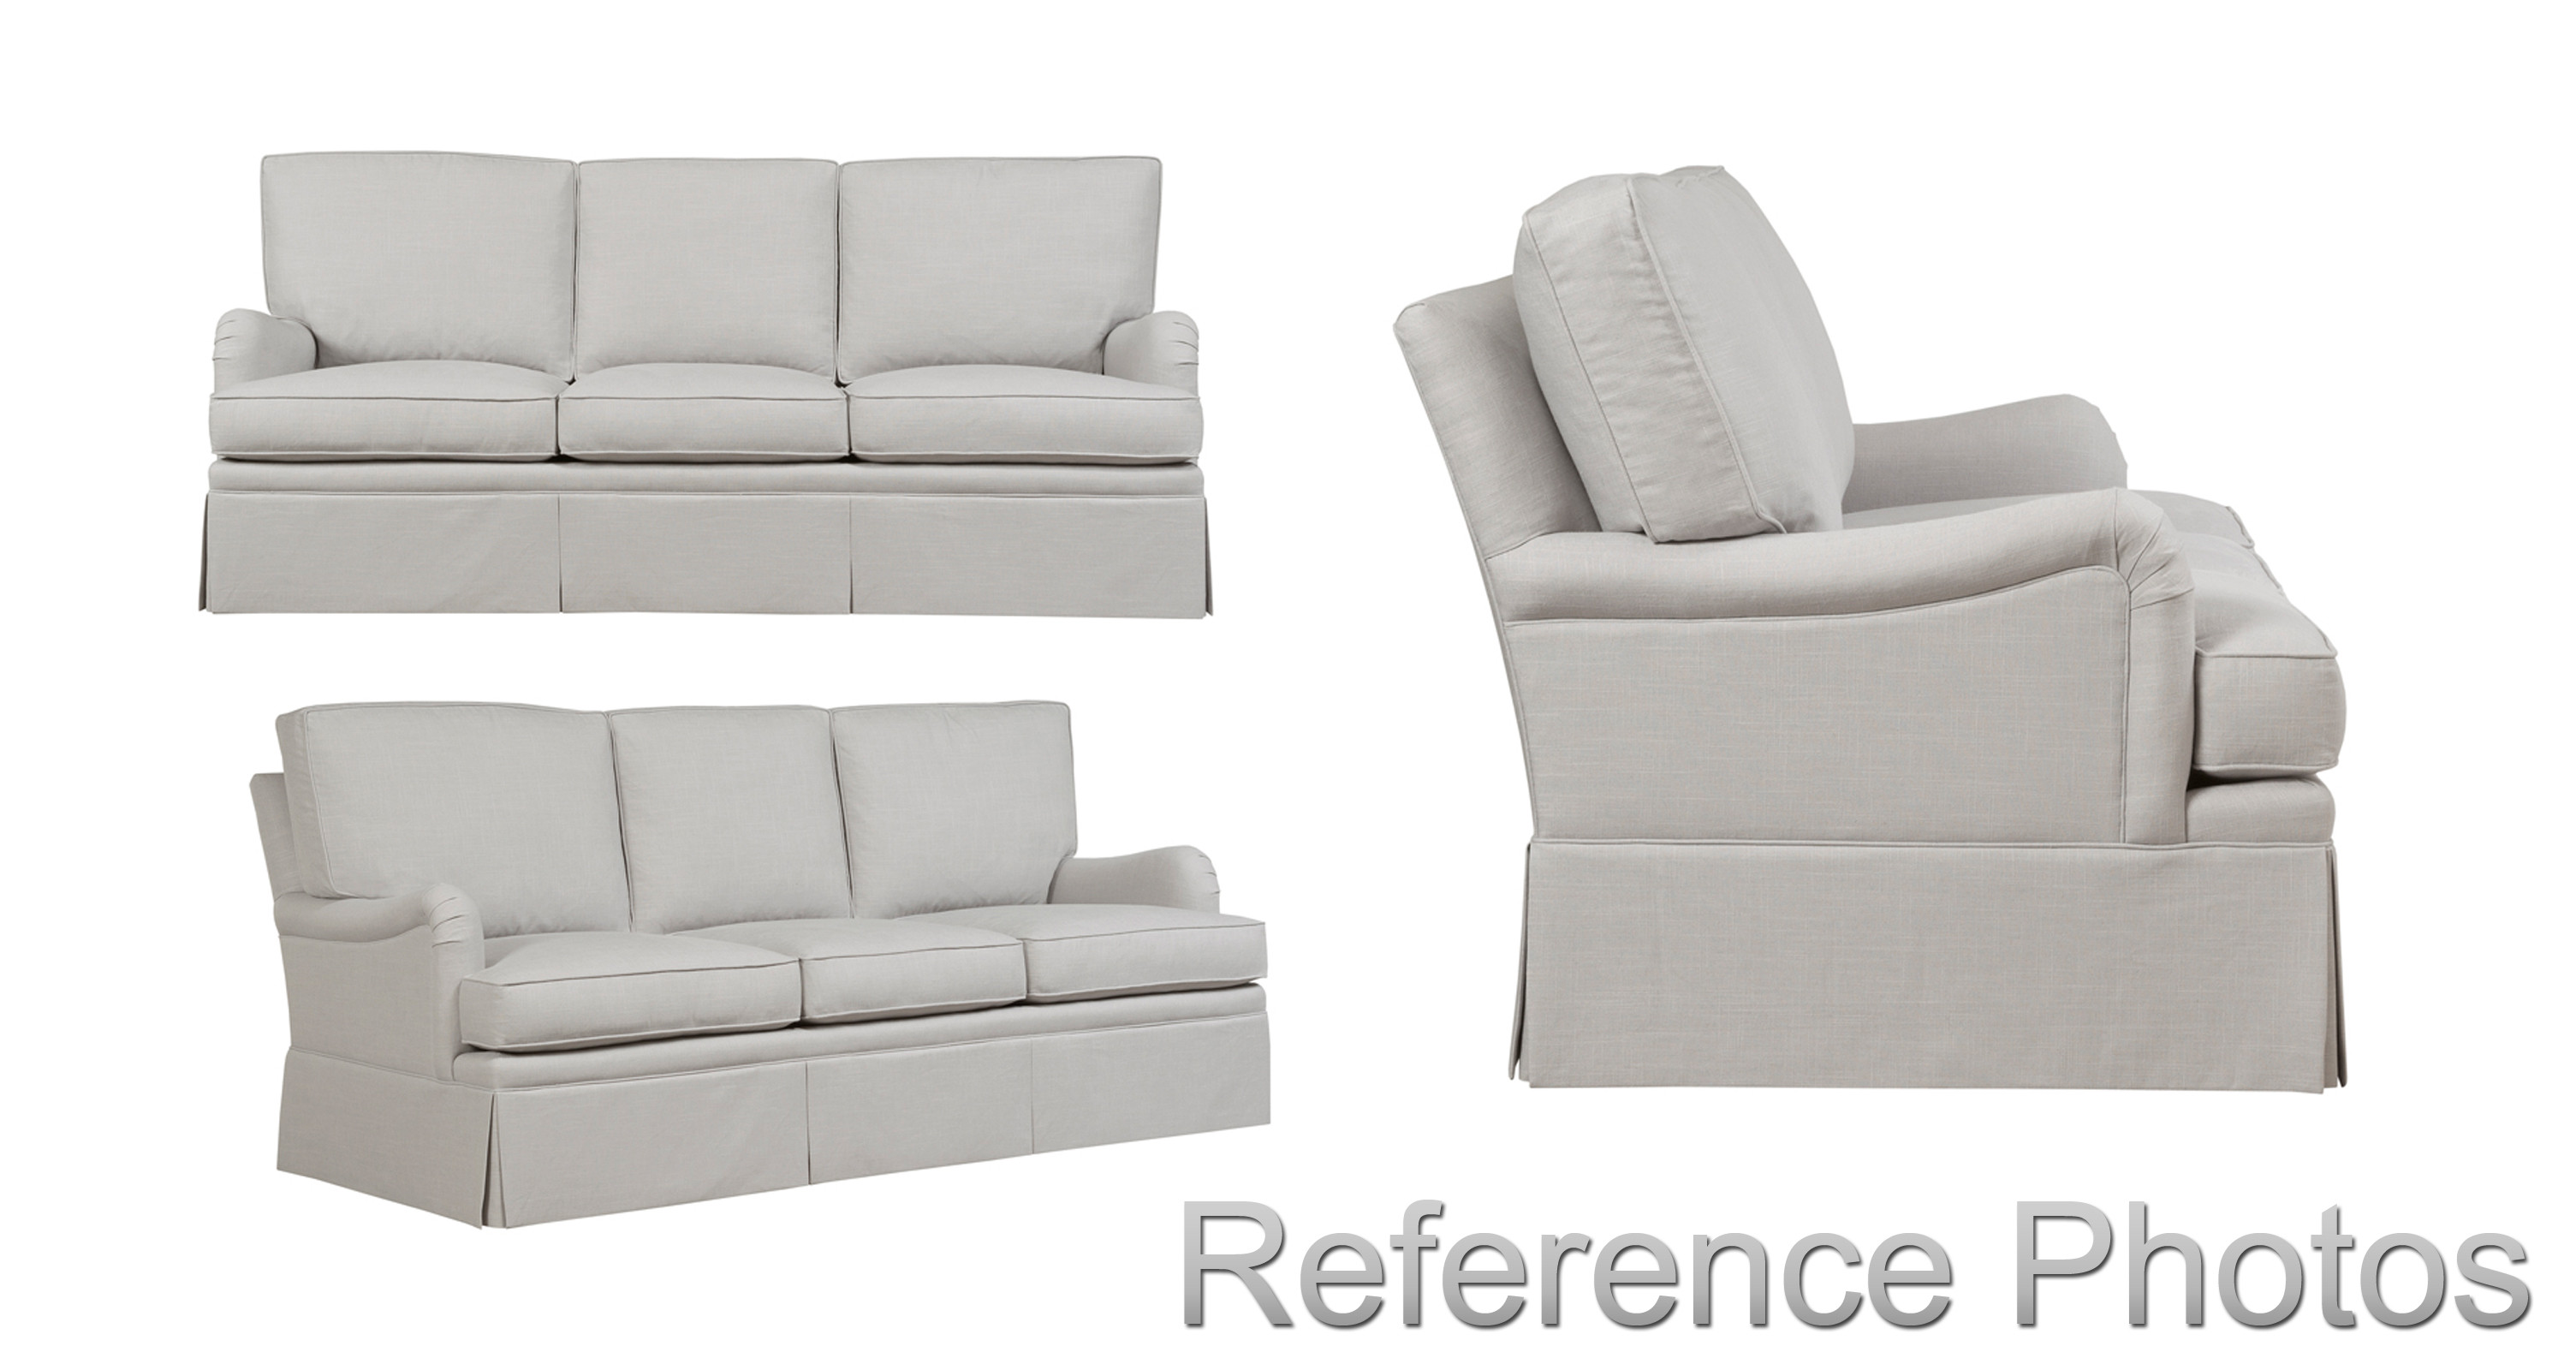 Sofa Style 1 reference photographs provided by Duralee.